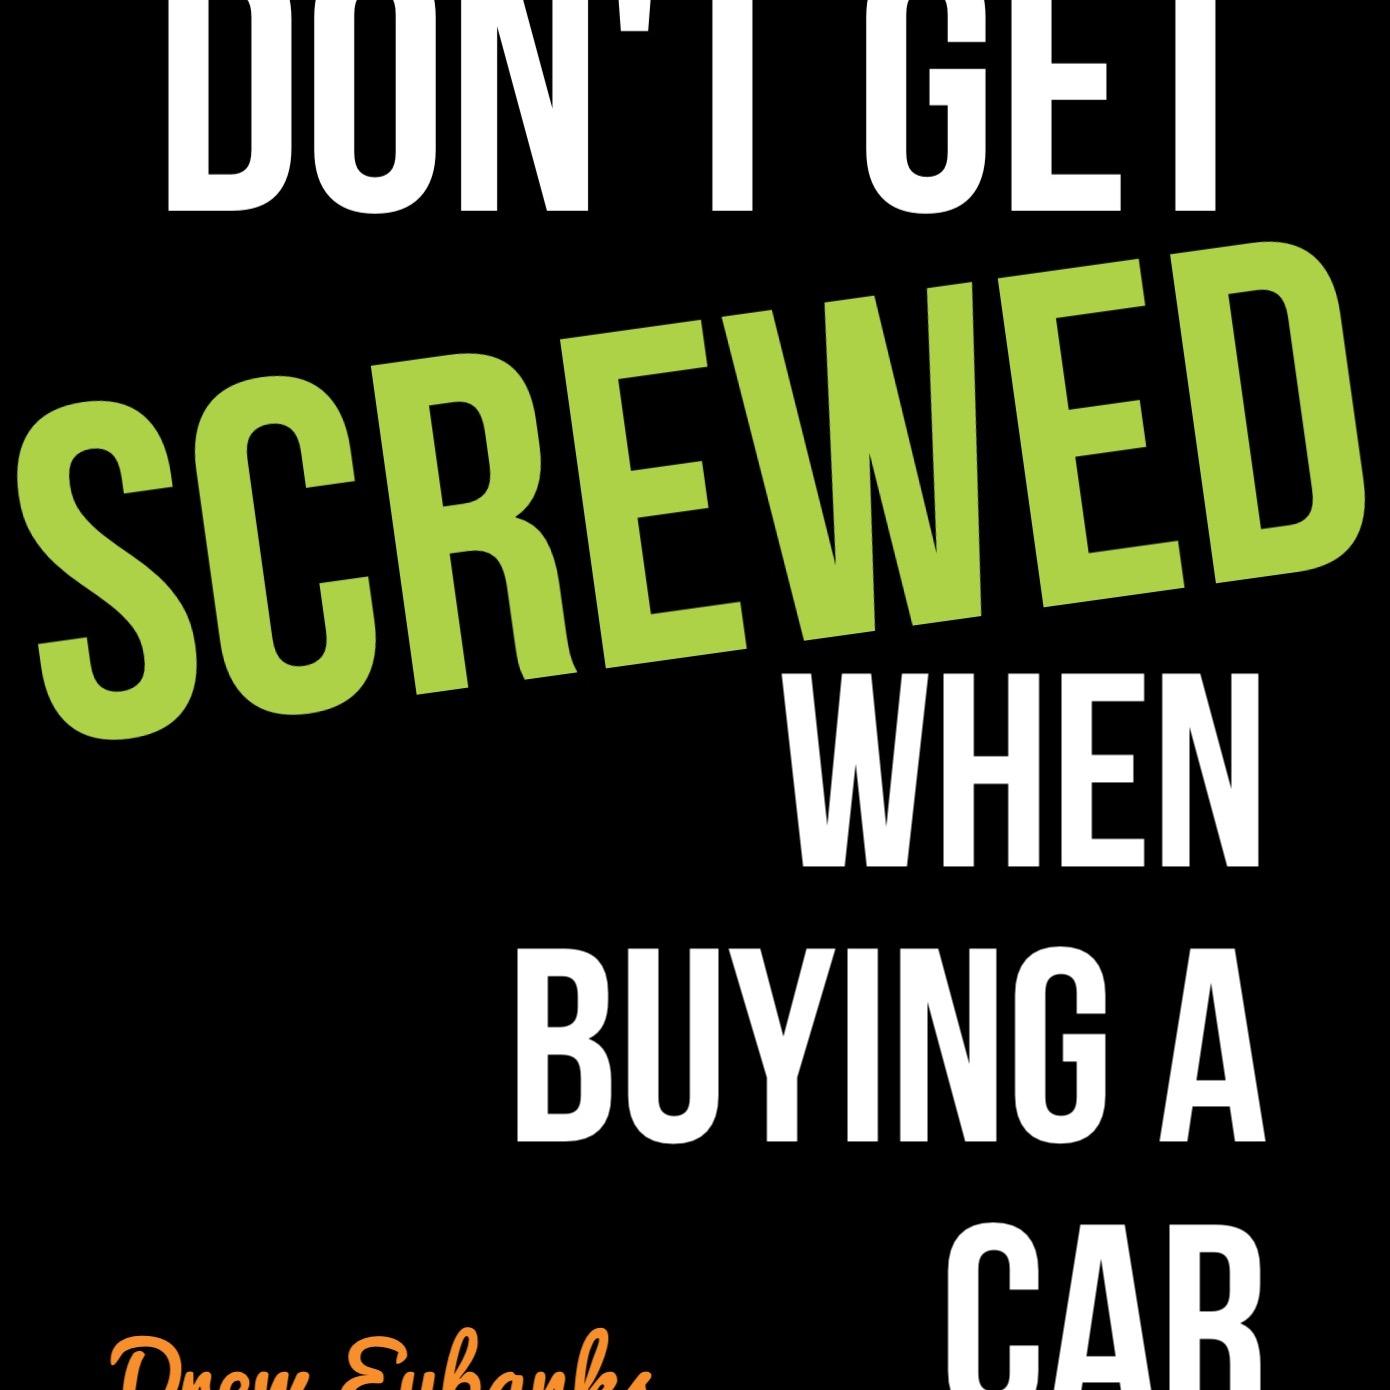 Screwed Guides is a series of books on how to get the best deal when buying a car. Available on Kindle and Free through Kindle Unlimited! Check them out...